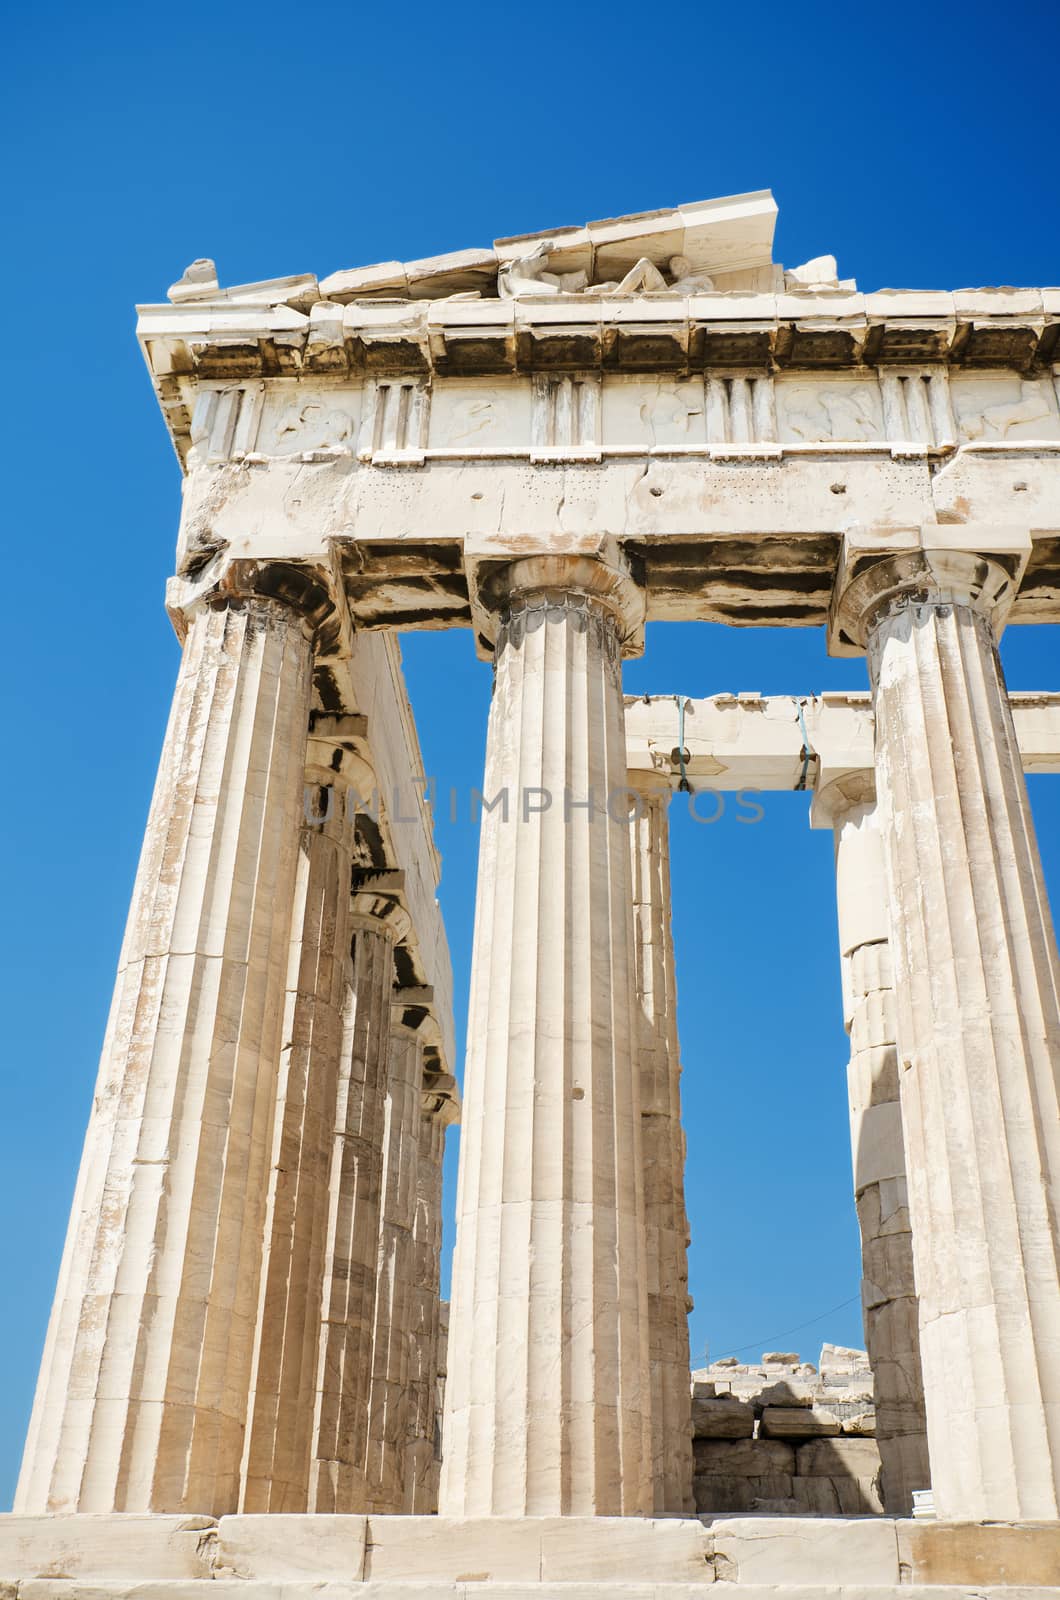 Detail of the columns in the famous Parthenon temple in the Acropolis, Athens, Greece.